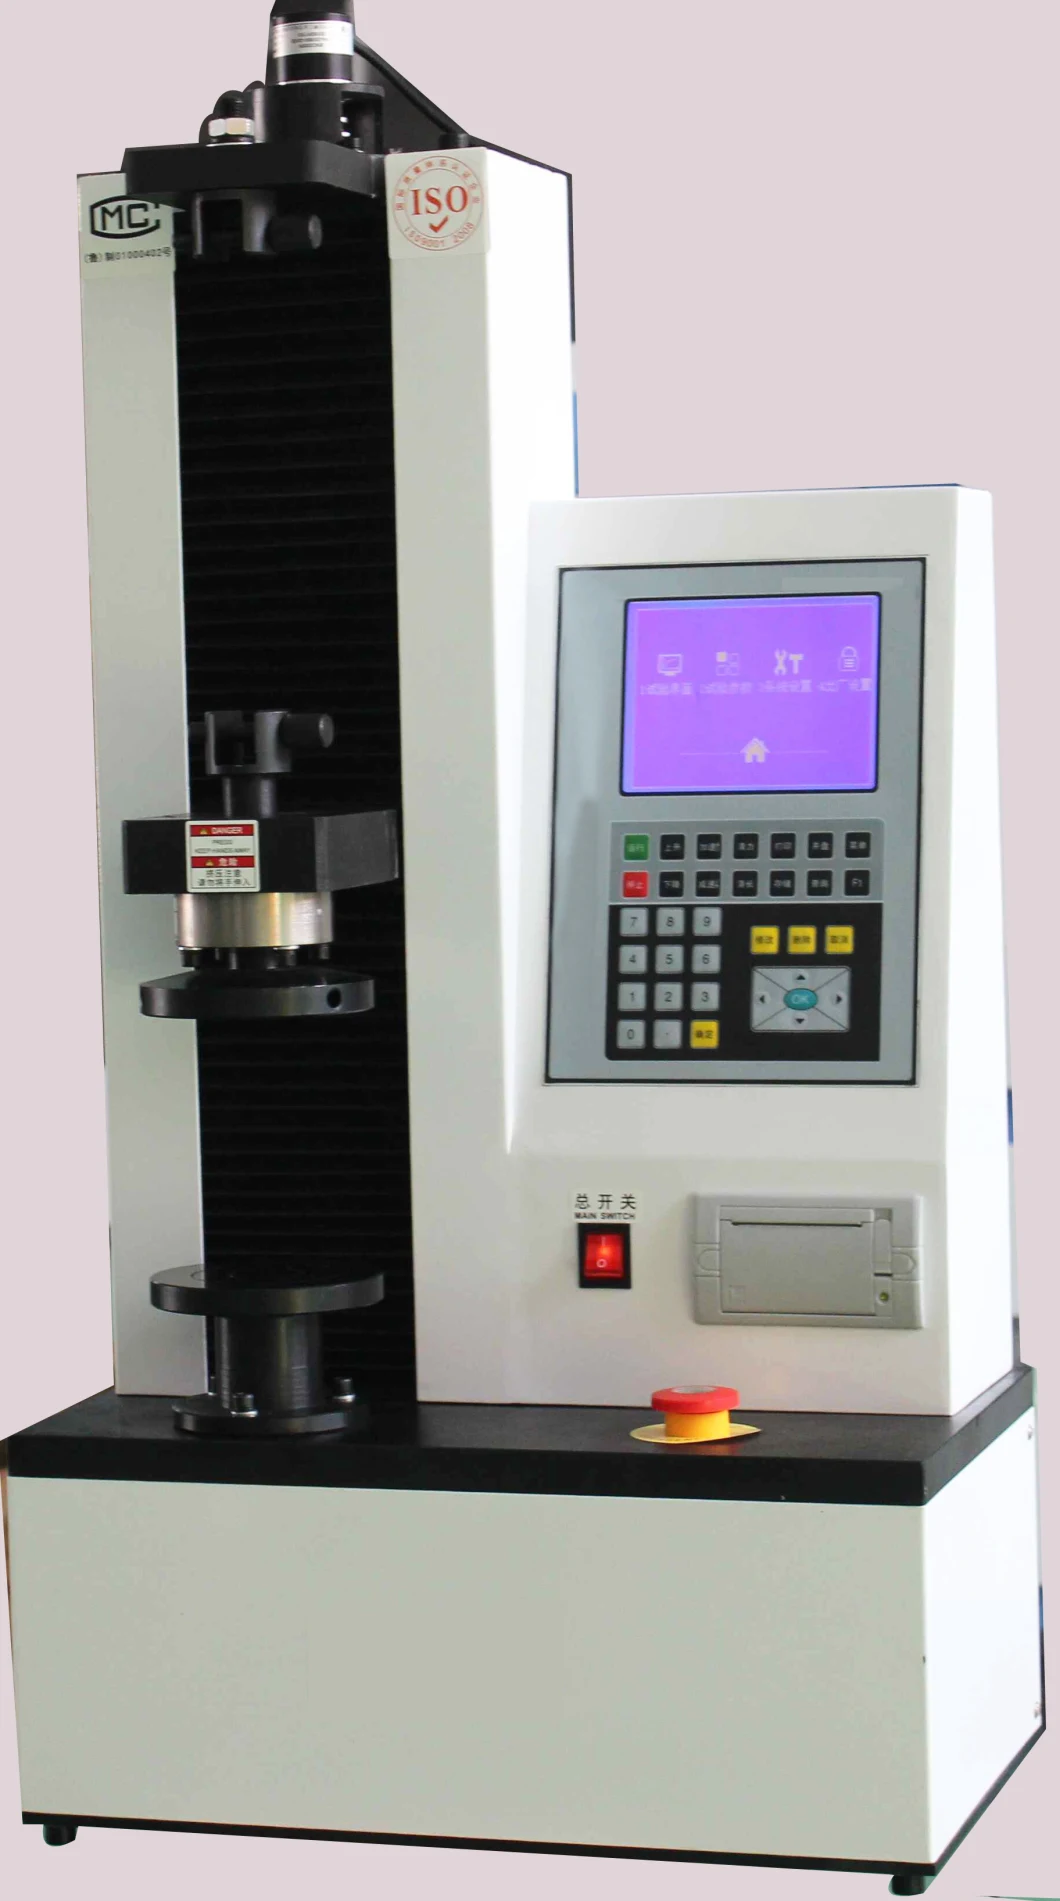 Digital Automatic Spring Tension & Compression Tester